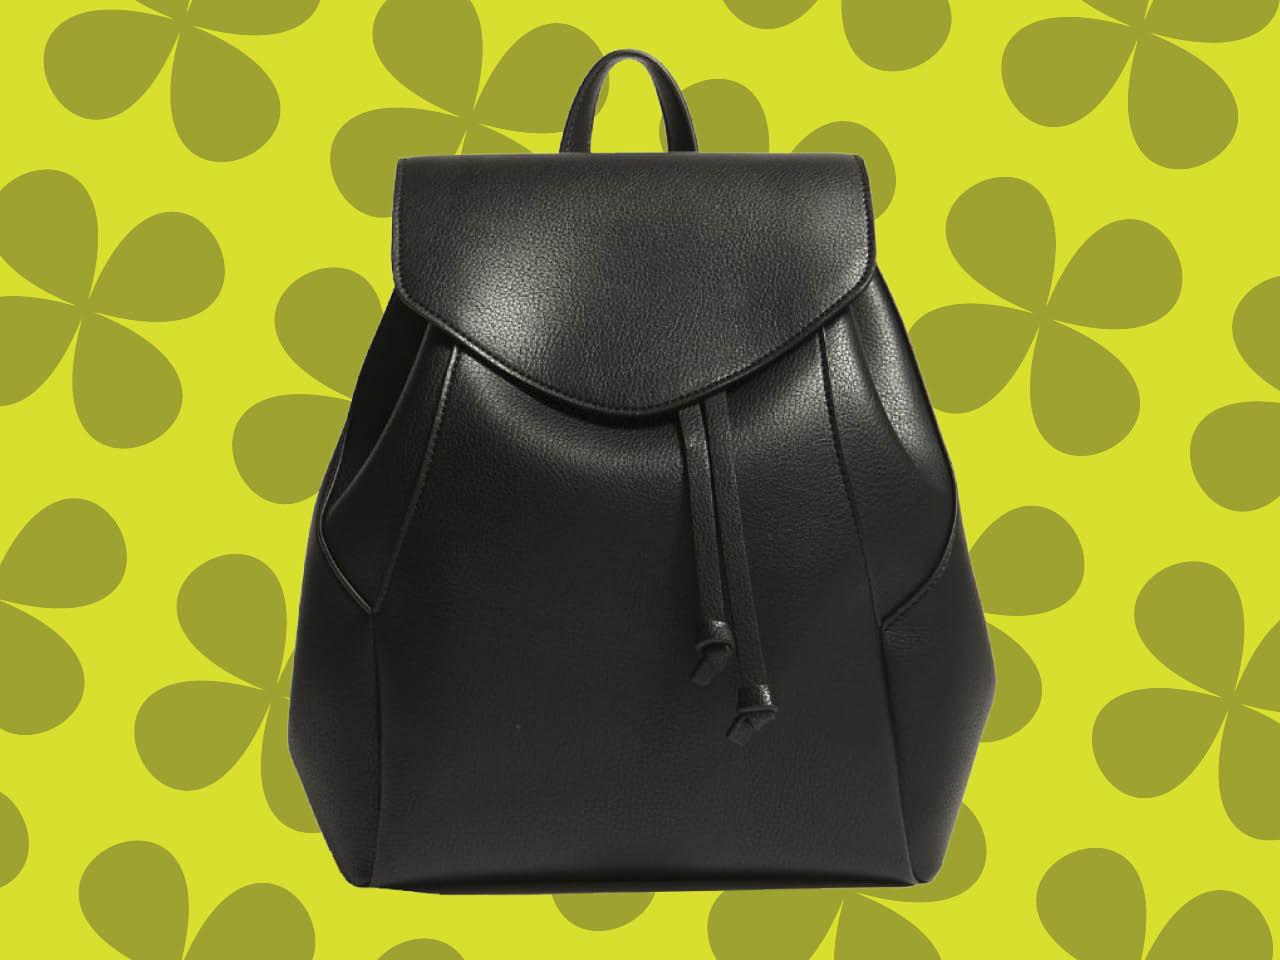 Cheap bags under $100: a black backpack from Forever 21